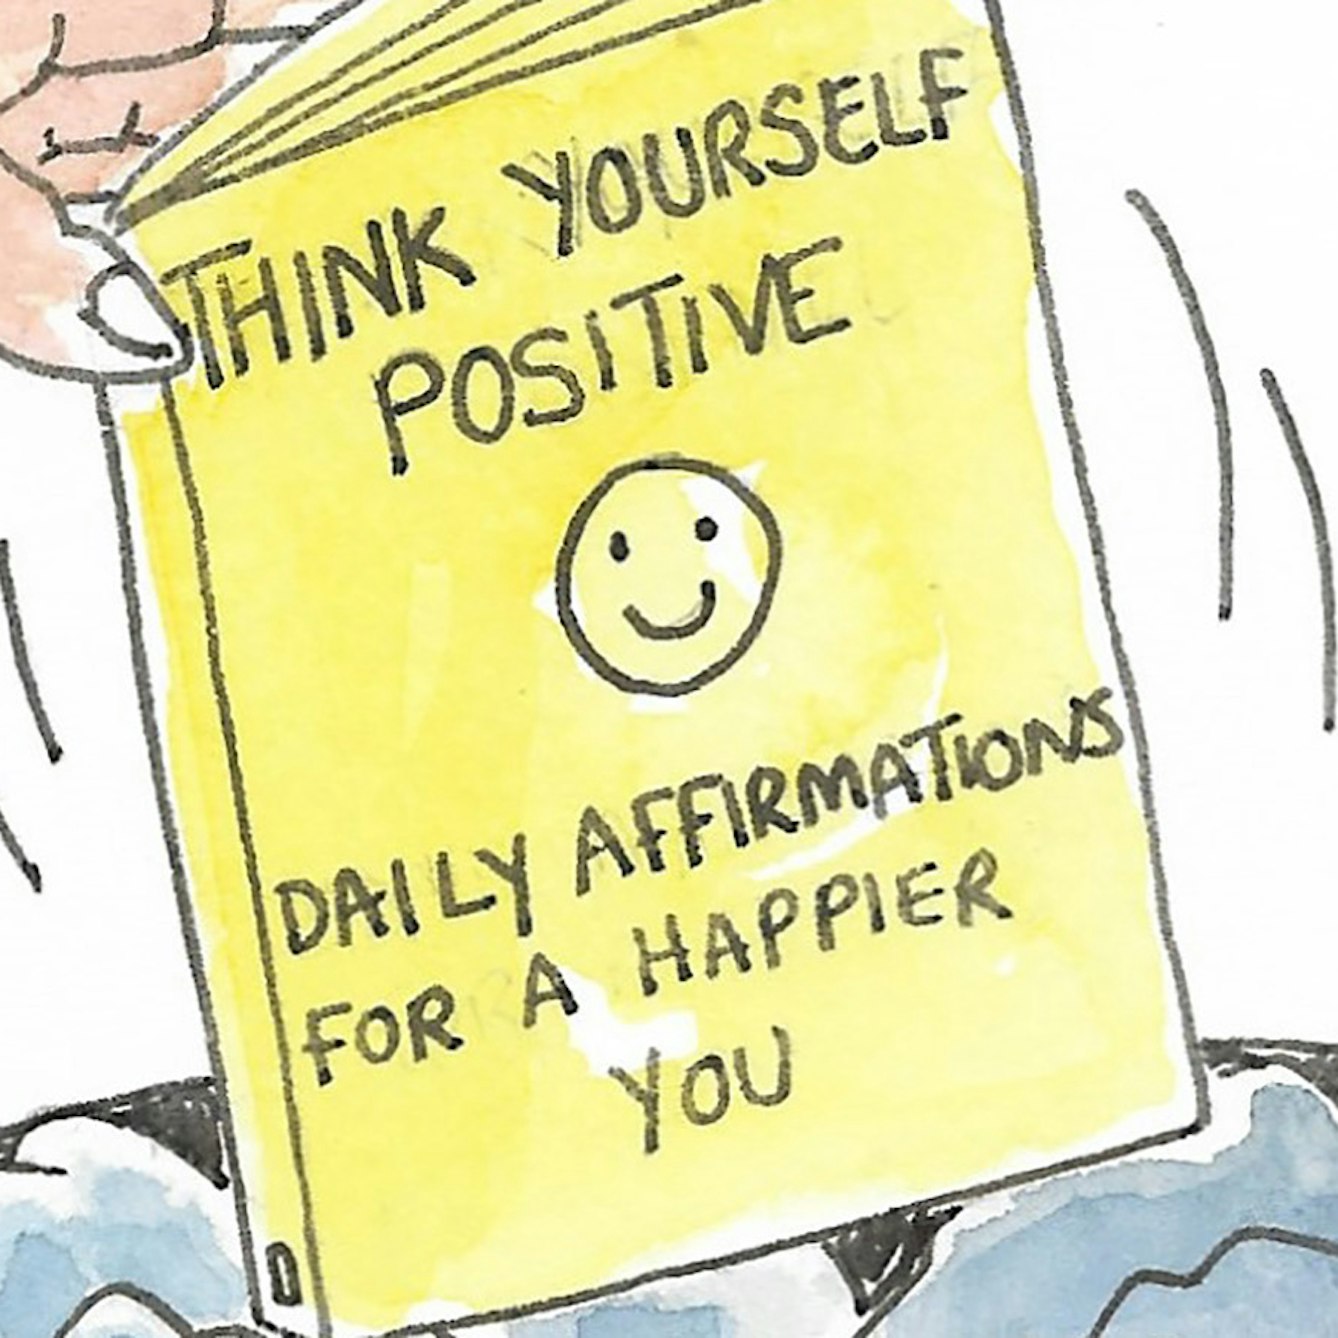 A book titled 'Think yourself positive: Daily affirmations for a happier you' is flung into a waste paper basket.